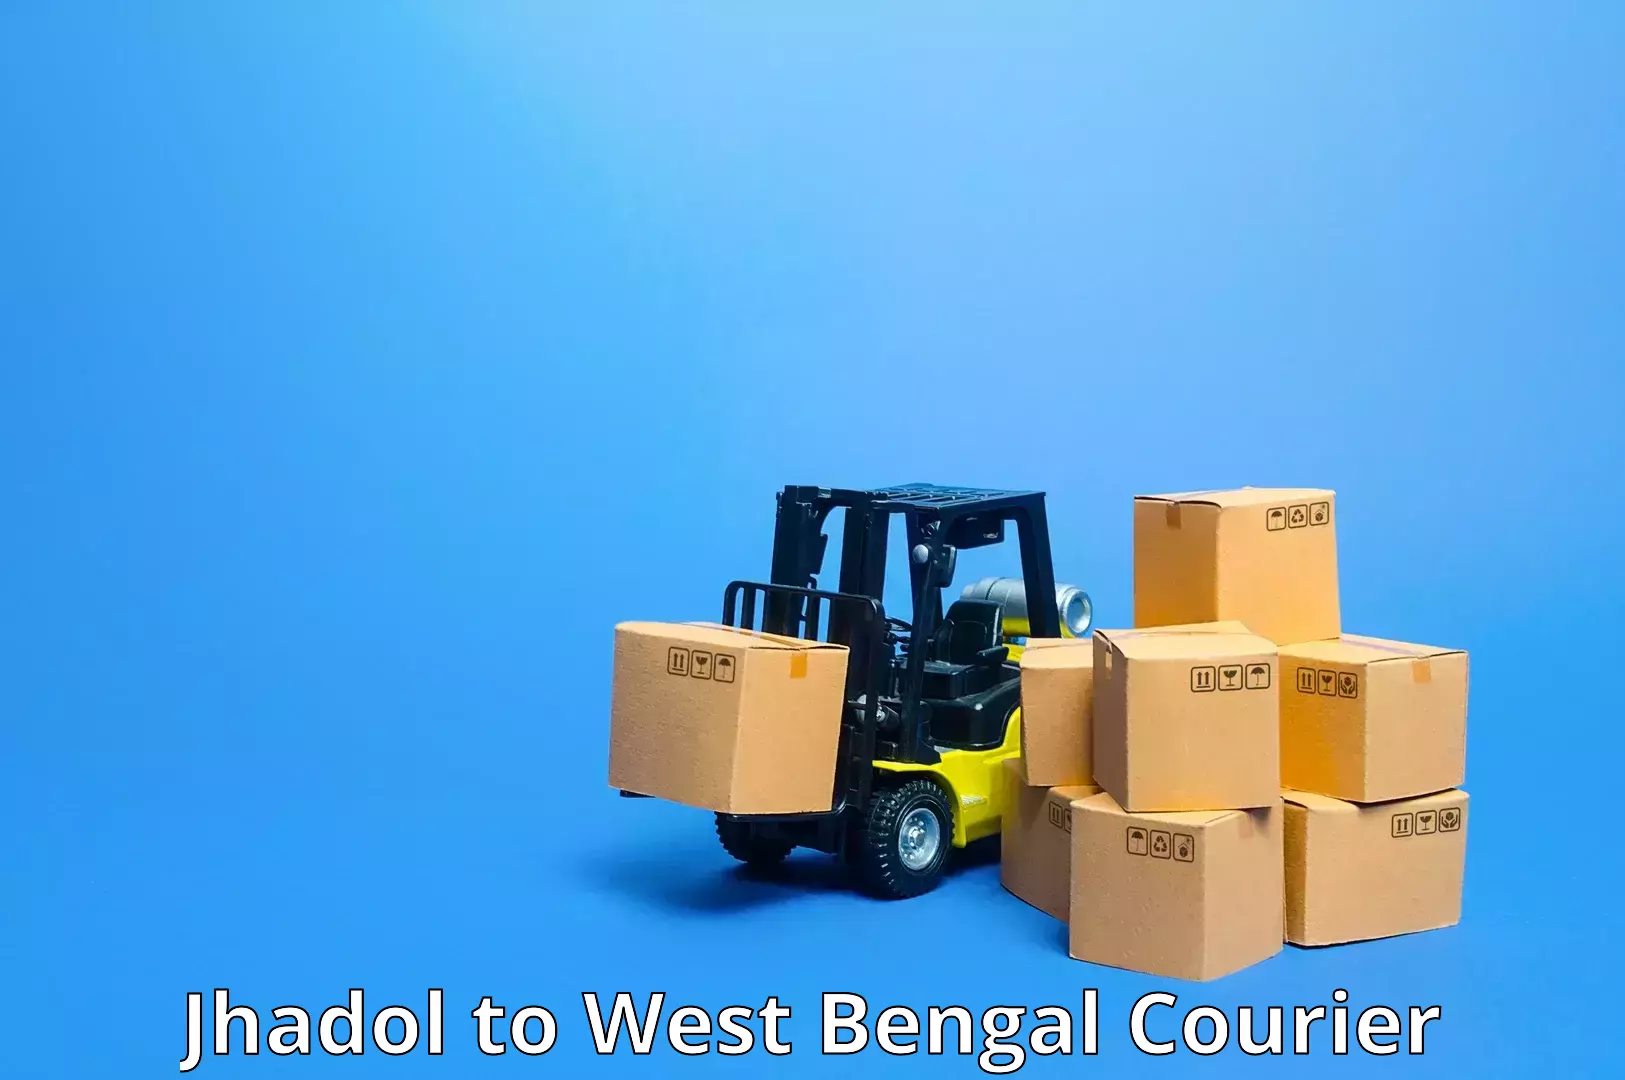 Cash on delivery service in Jhadol to Kolkata Port